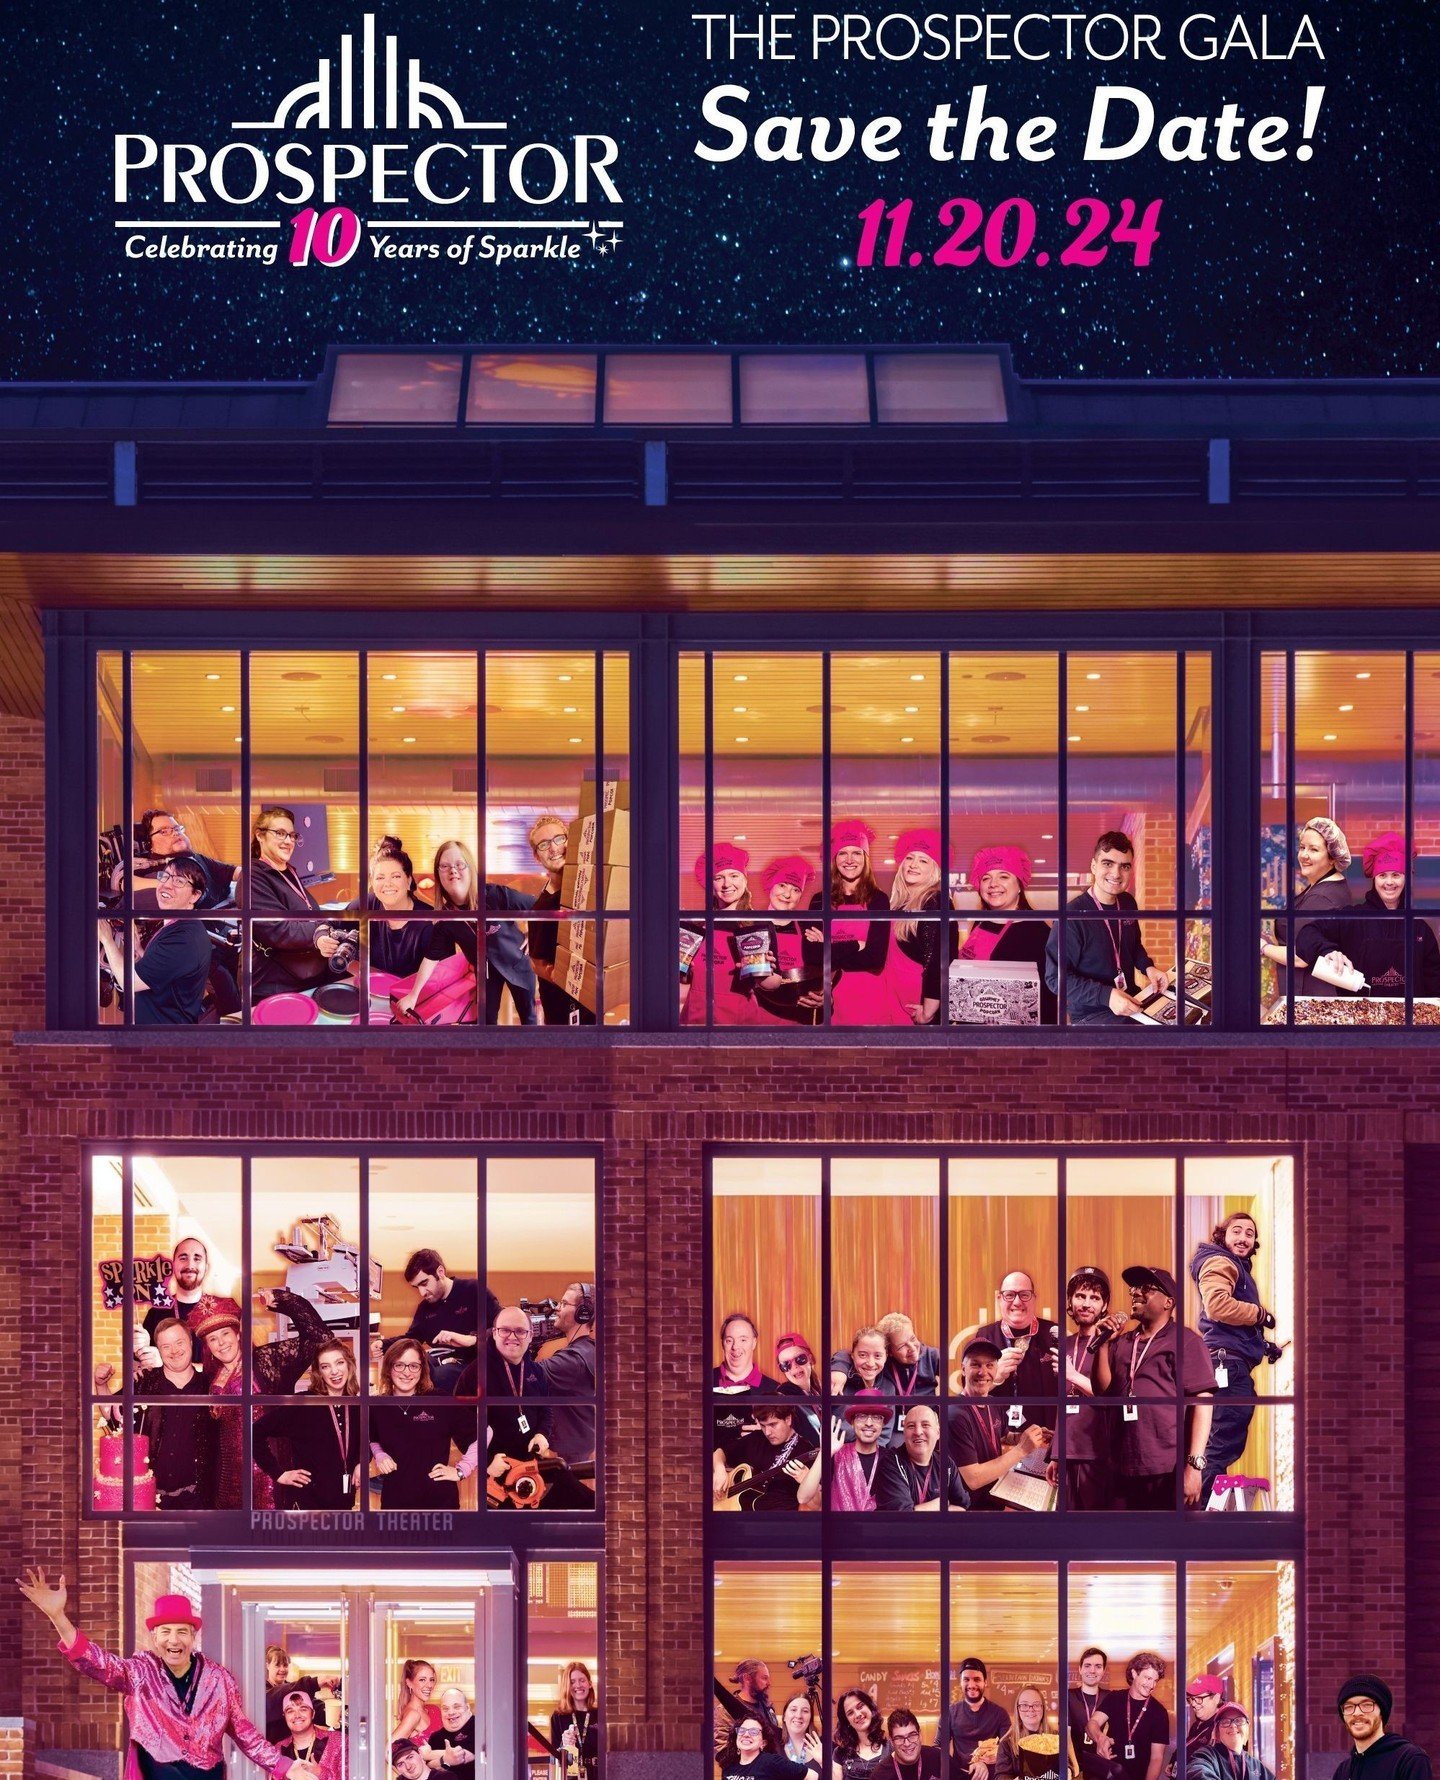 Save the Date! We are celebrating 10 years of Sparkle with The Prospector Gala! Event information and sponsorship opportunities are available in our link in bio 🔗⁠
Contact our Sponsorship Manager to learn more!⁠
jimmy.wilkinson@prospectortheater.org